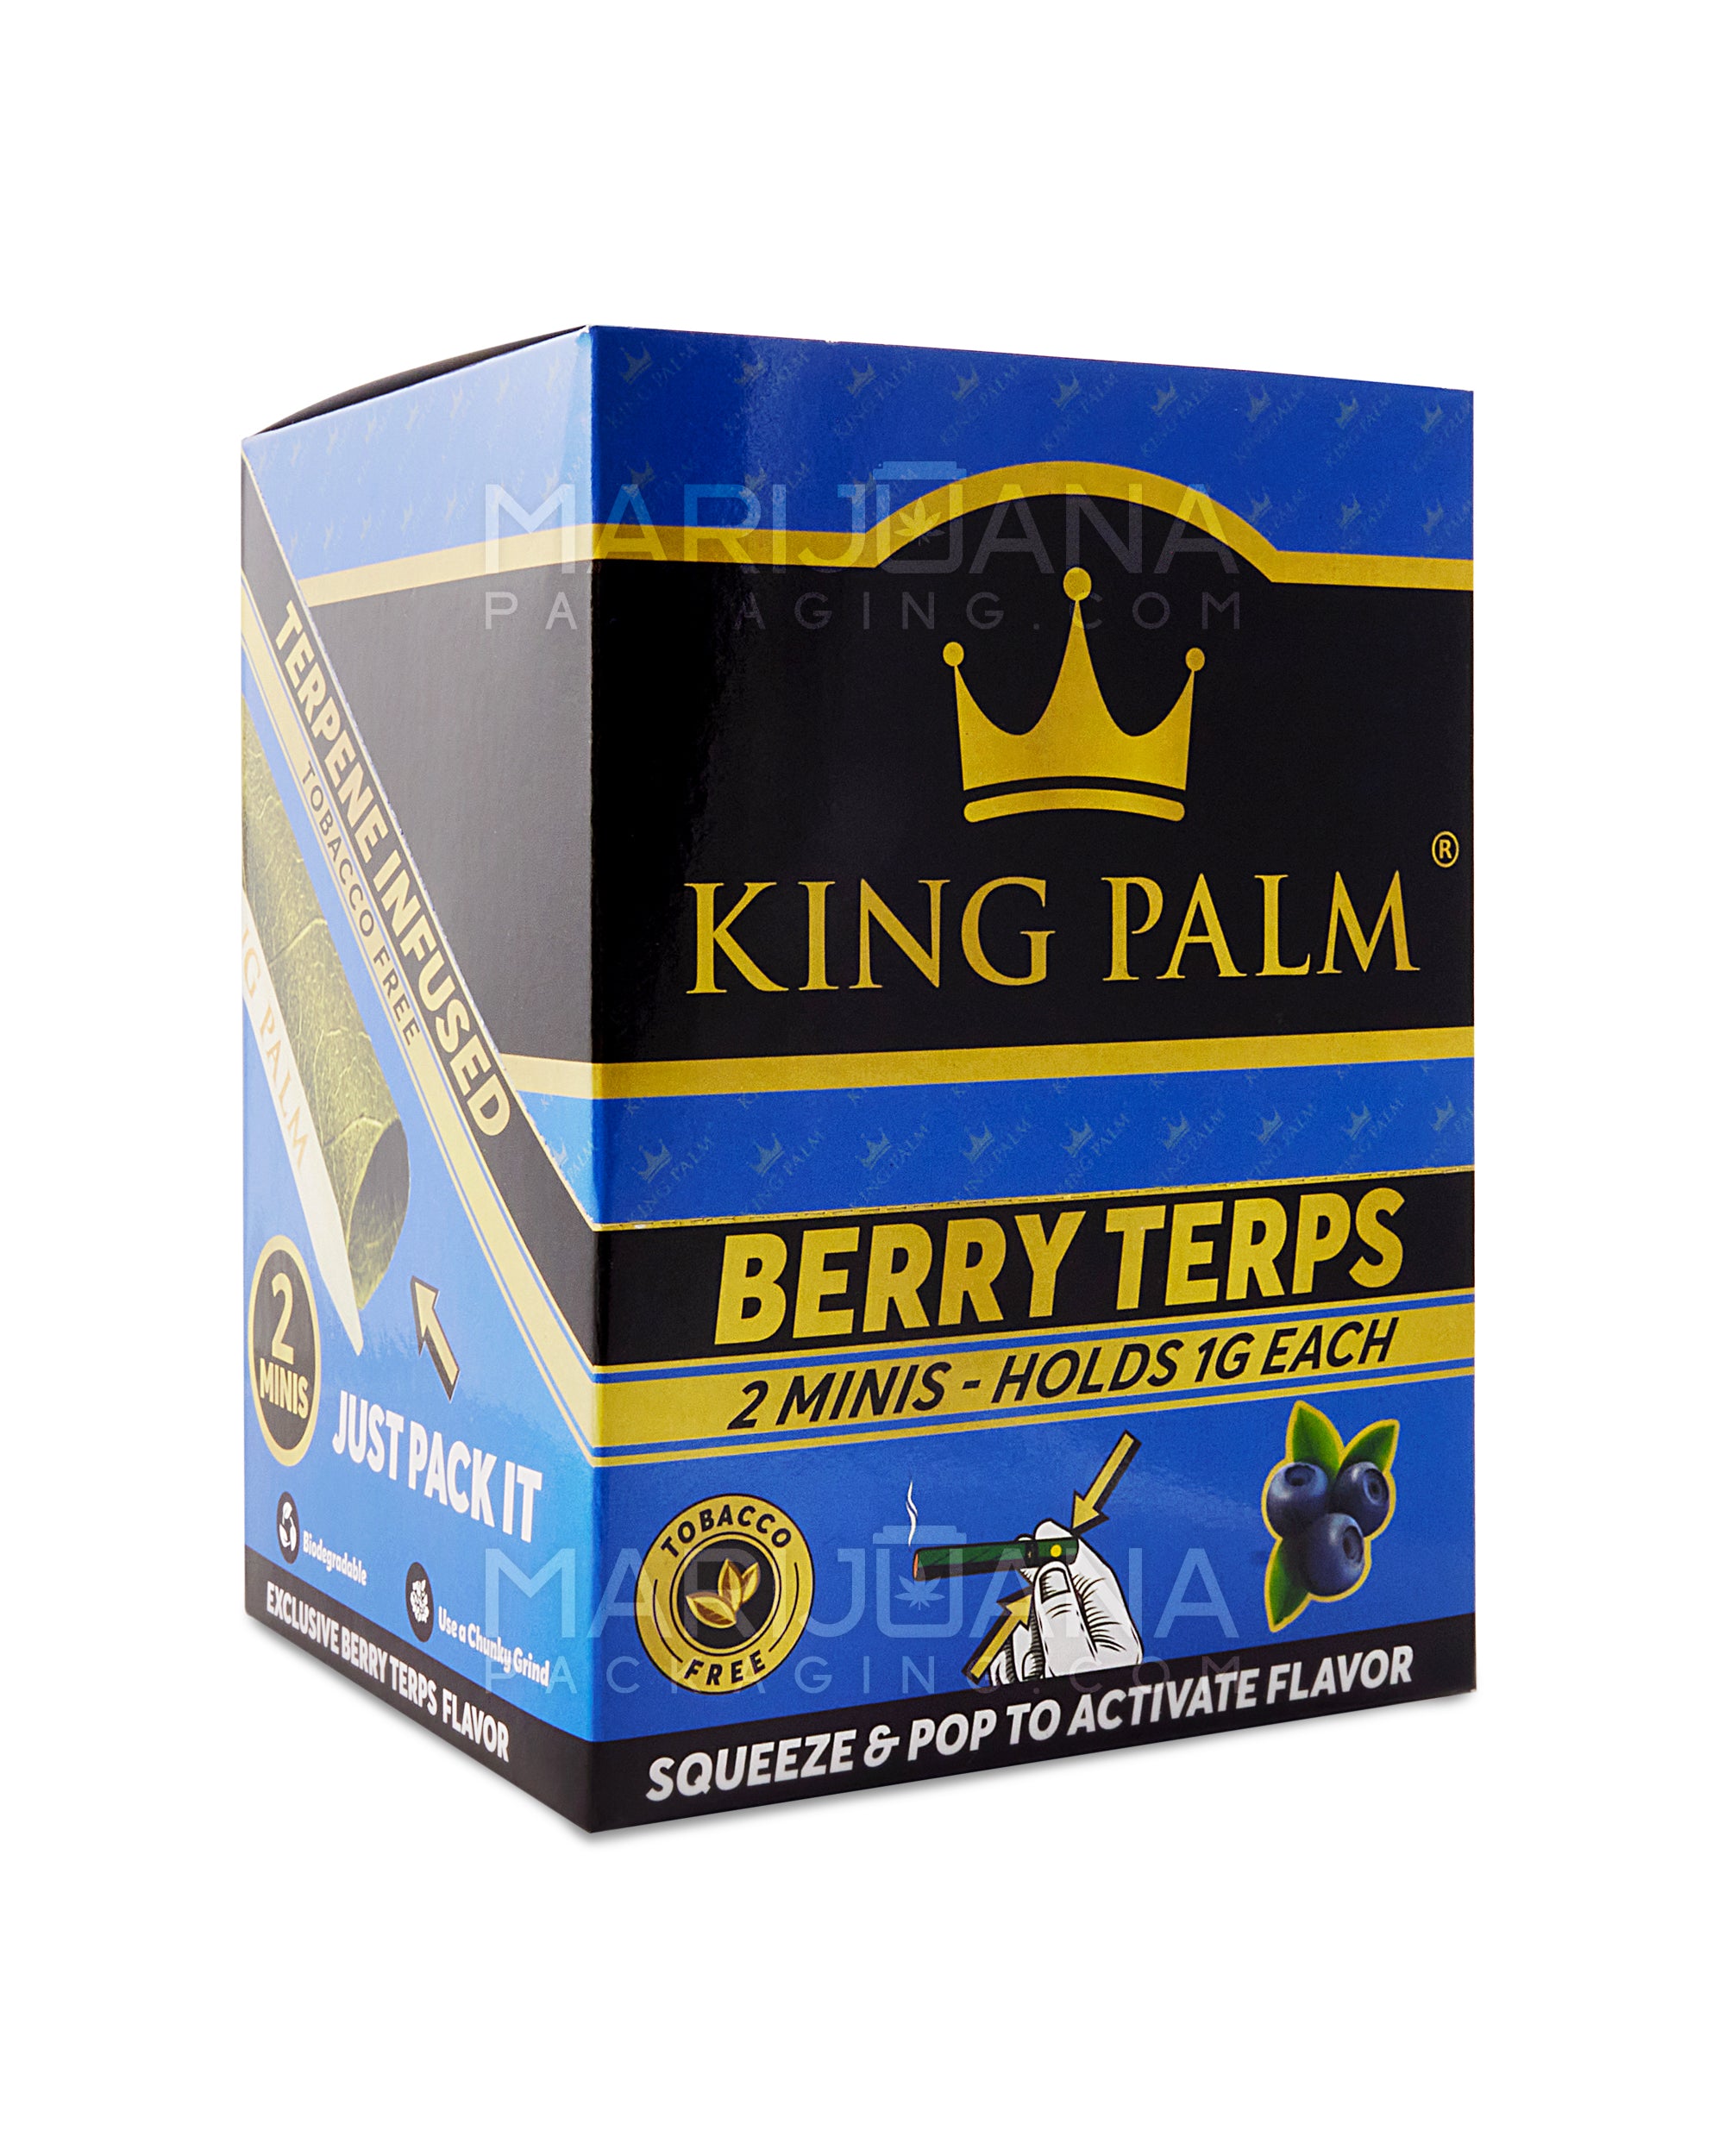 KING PALM | 'Retail Display' Natural Leaf Mini Rolls Blunt Wraps | 85mm - Berry Terps - 20 Count